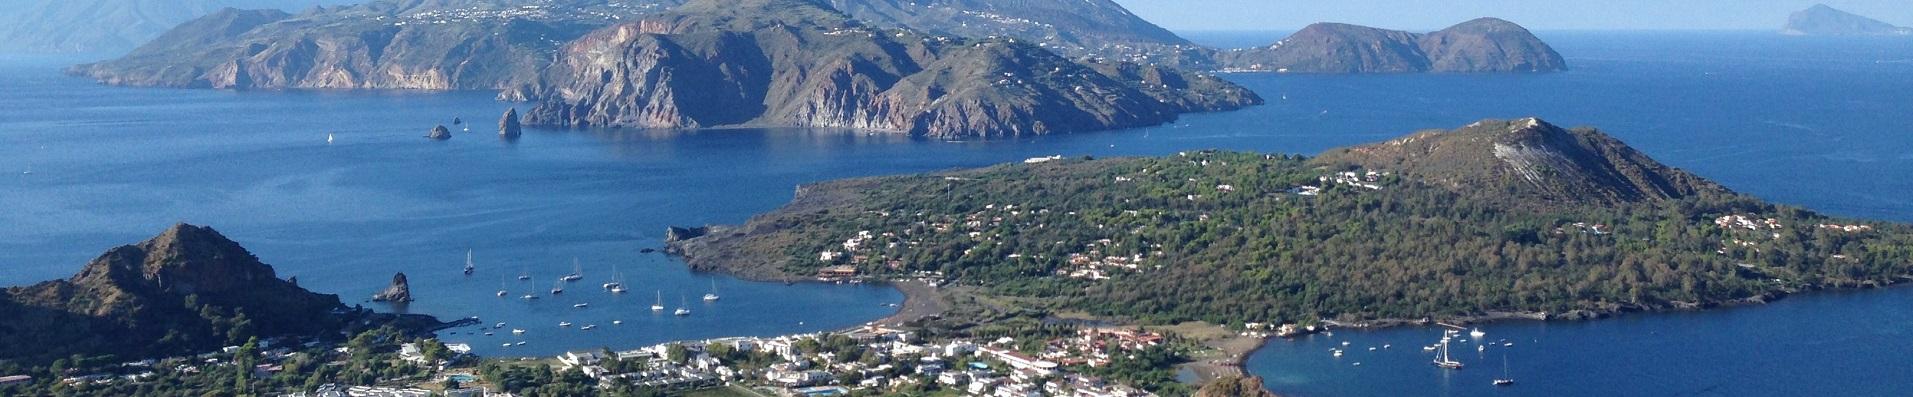 Villas and holiday homes on the Aeolian Islands